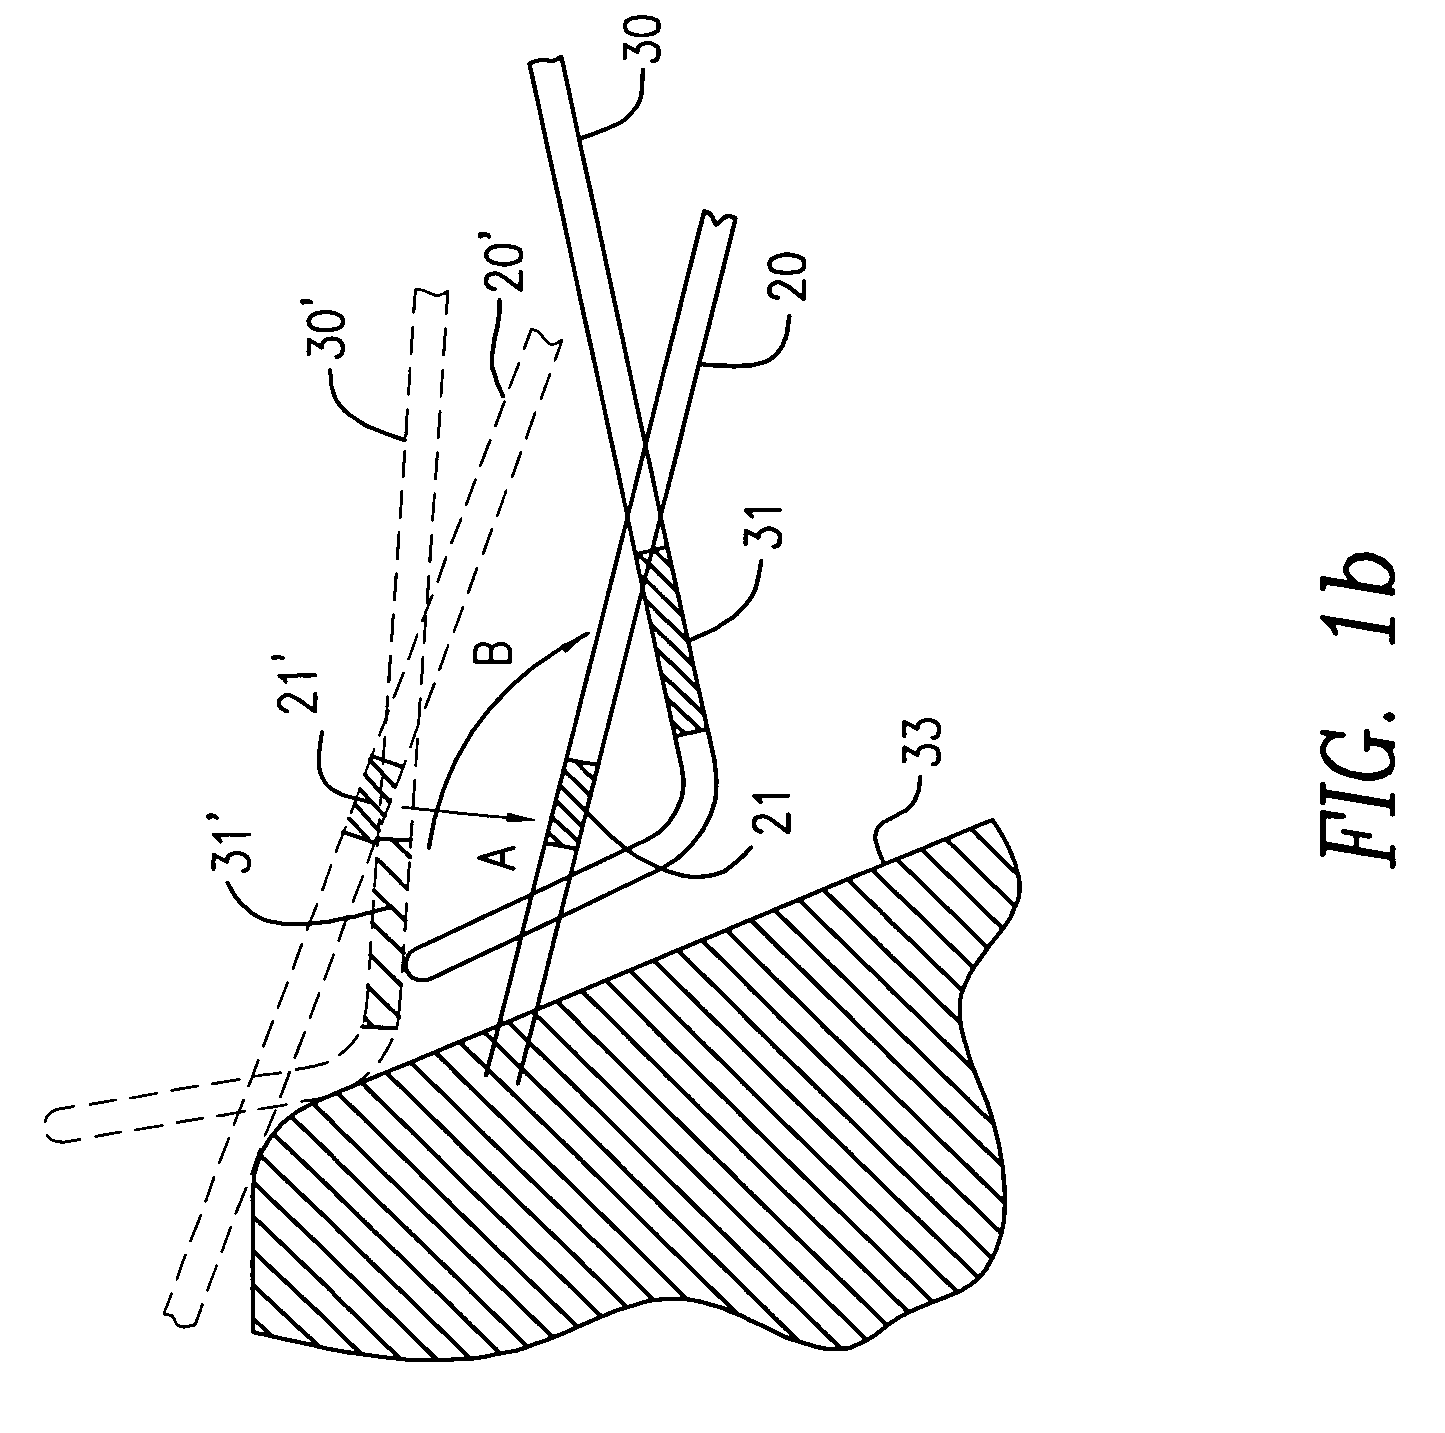 Stapler with leaf spring actuation mechanism